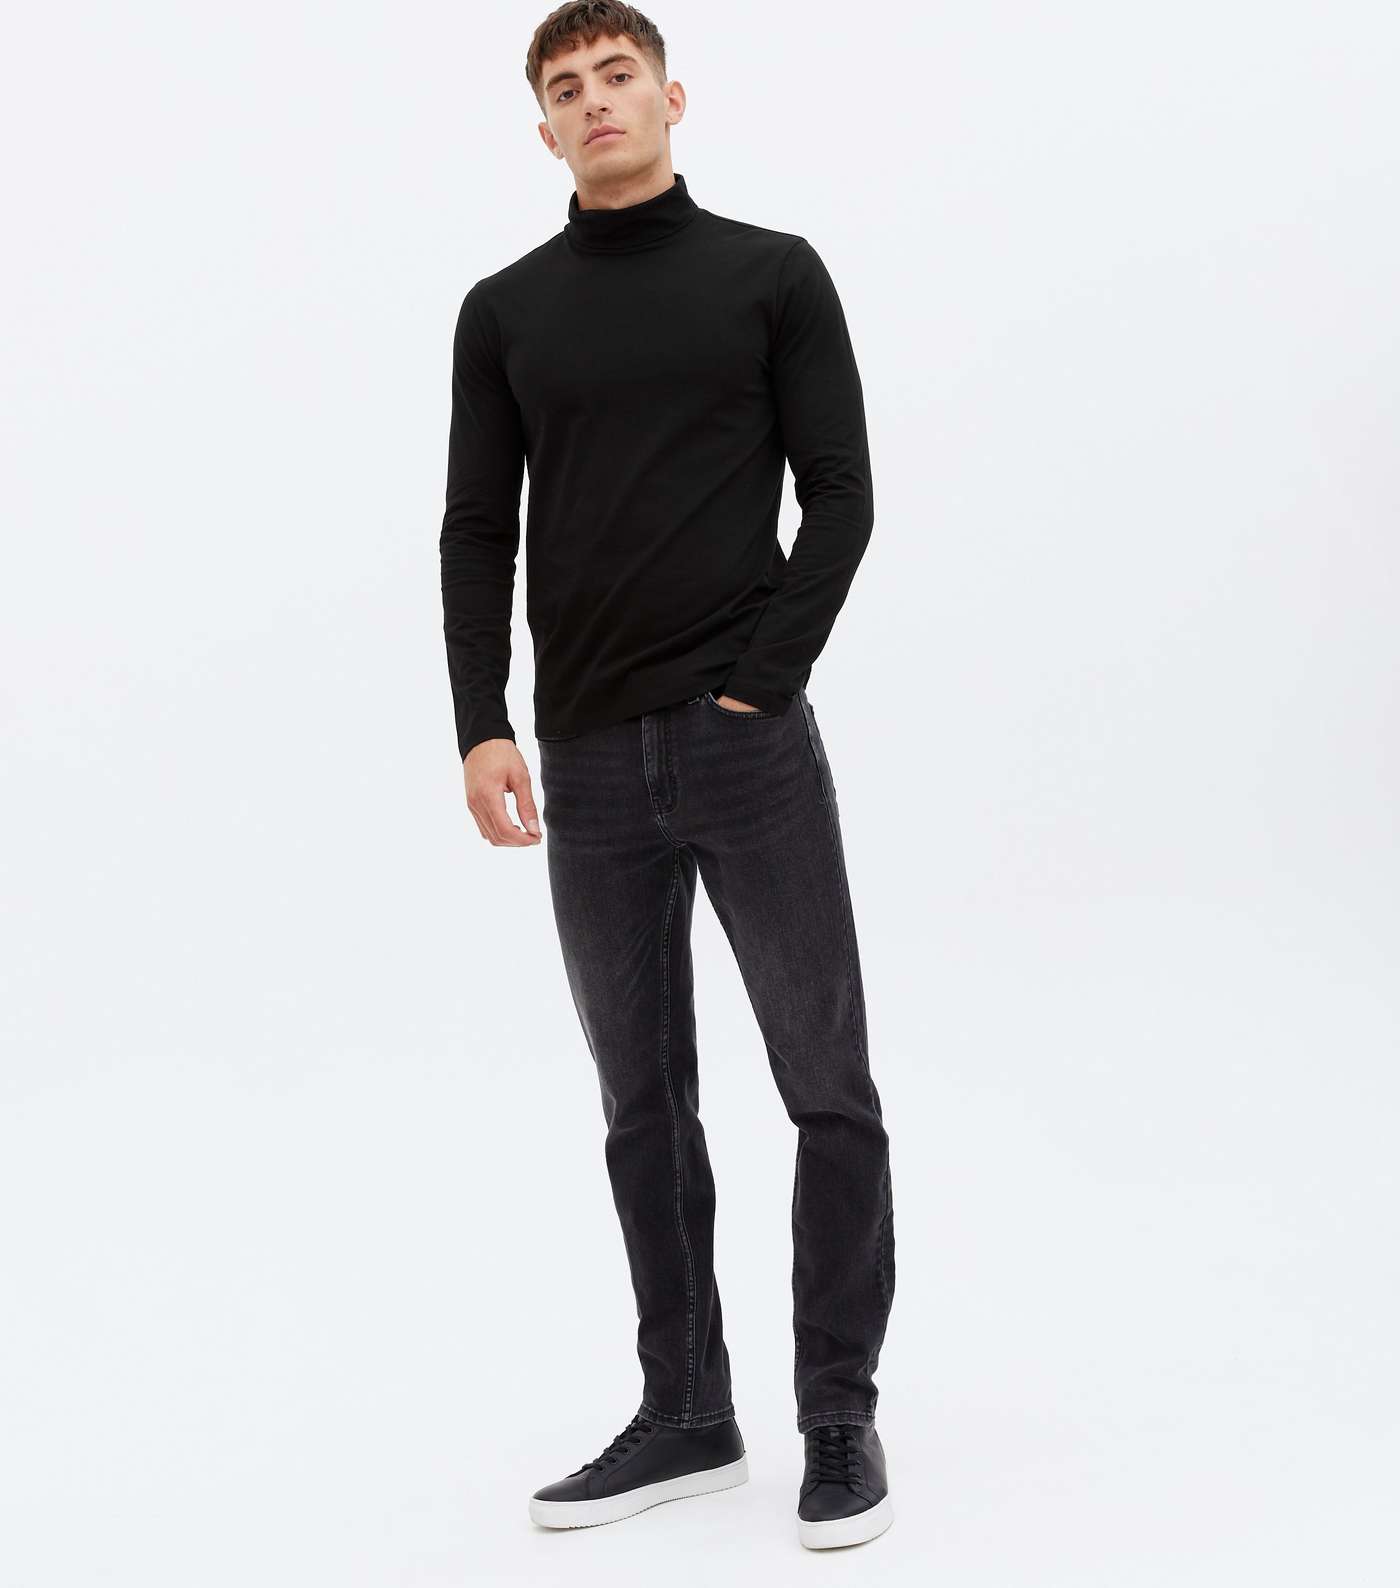 Black Long Sleeve Roll Neck Top Image 2